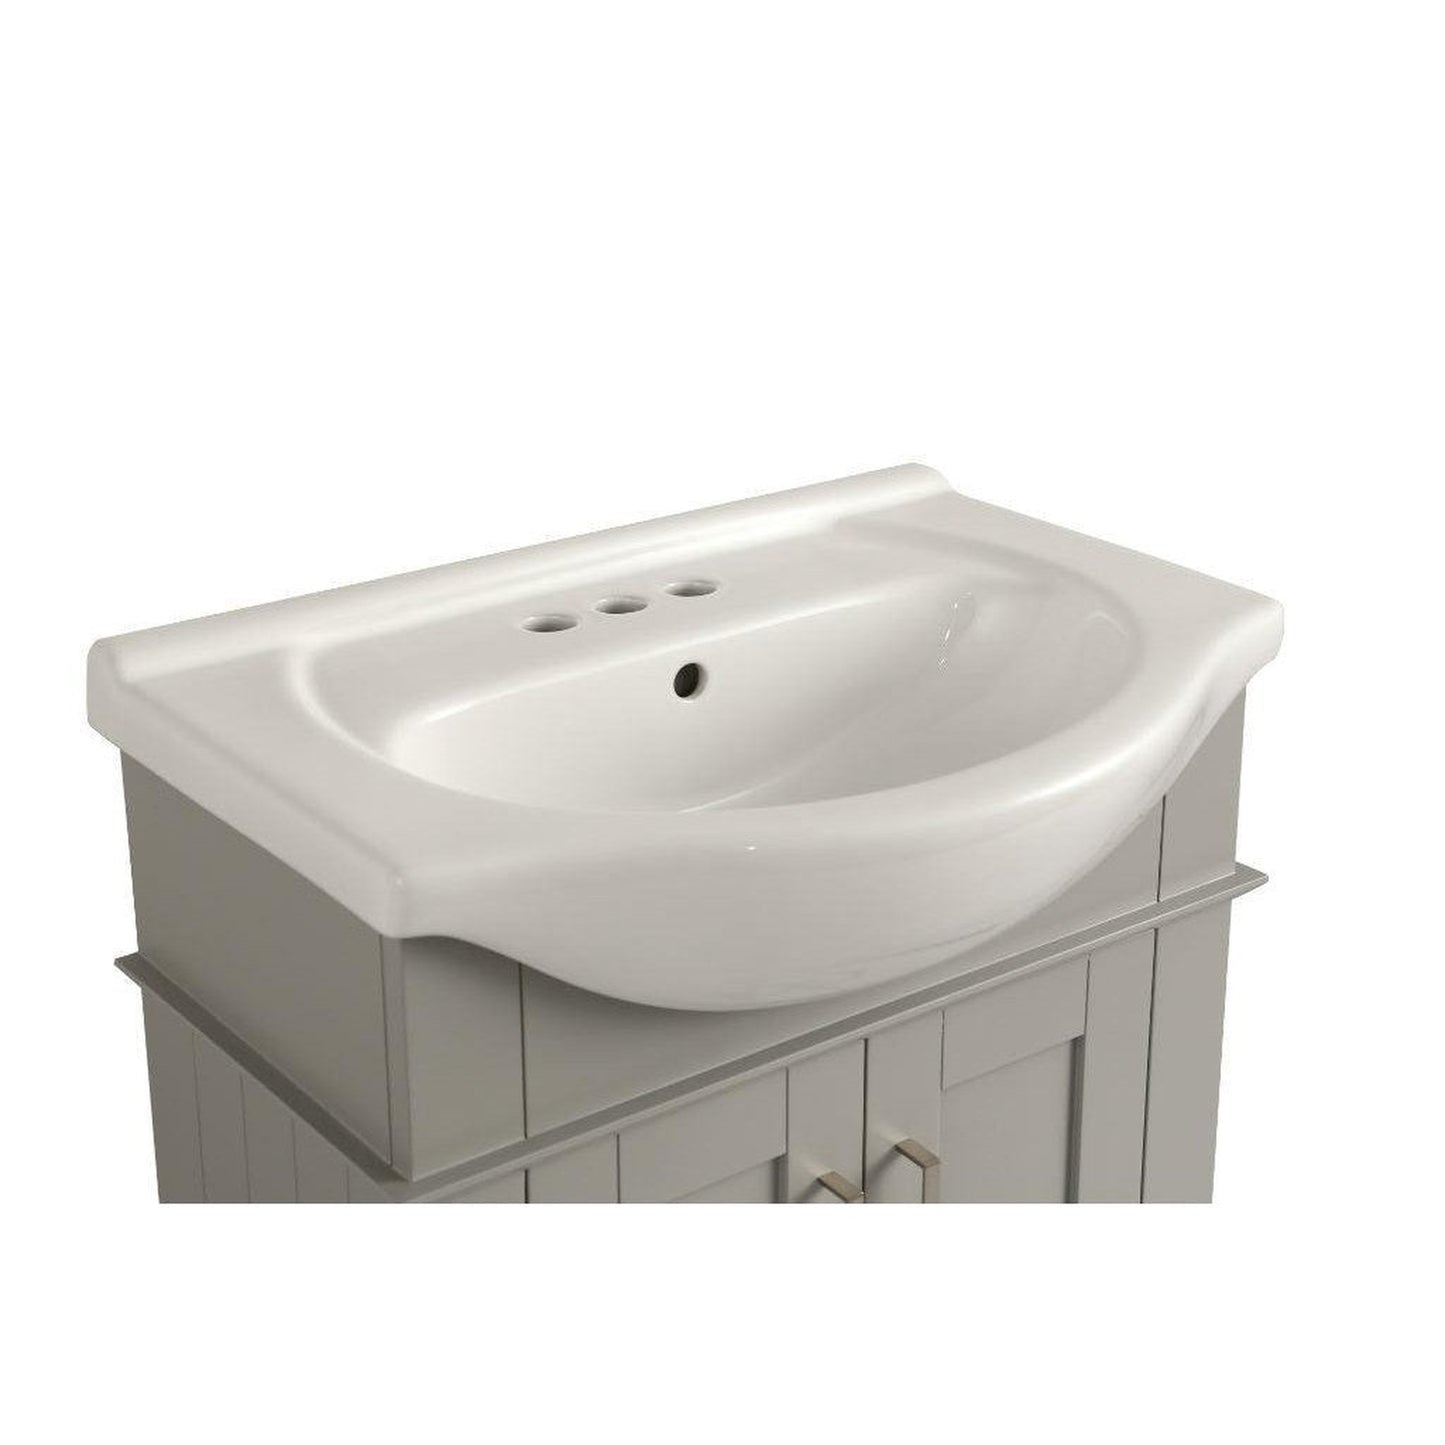 Legion Furniture WLF6042-G 24" Gray Freestanding Vanity With White Ceramic Top and Sink